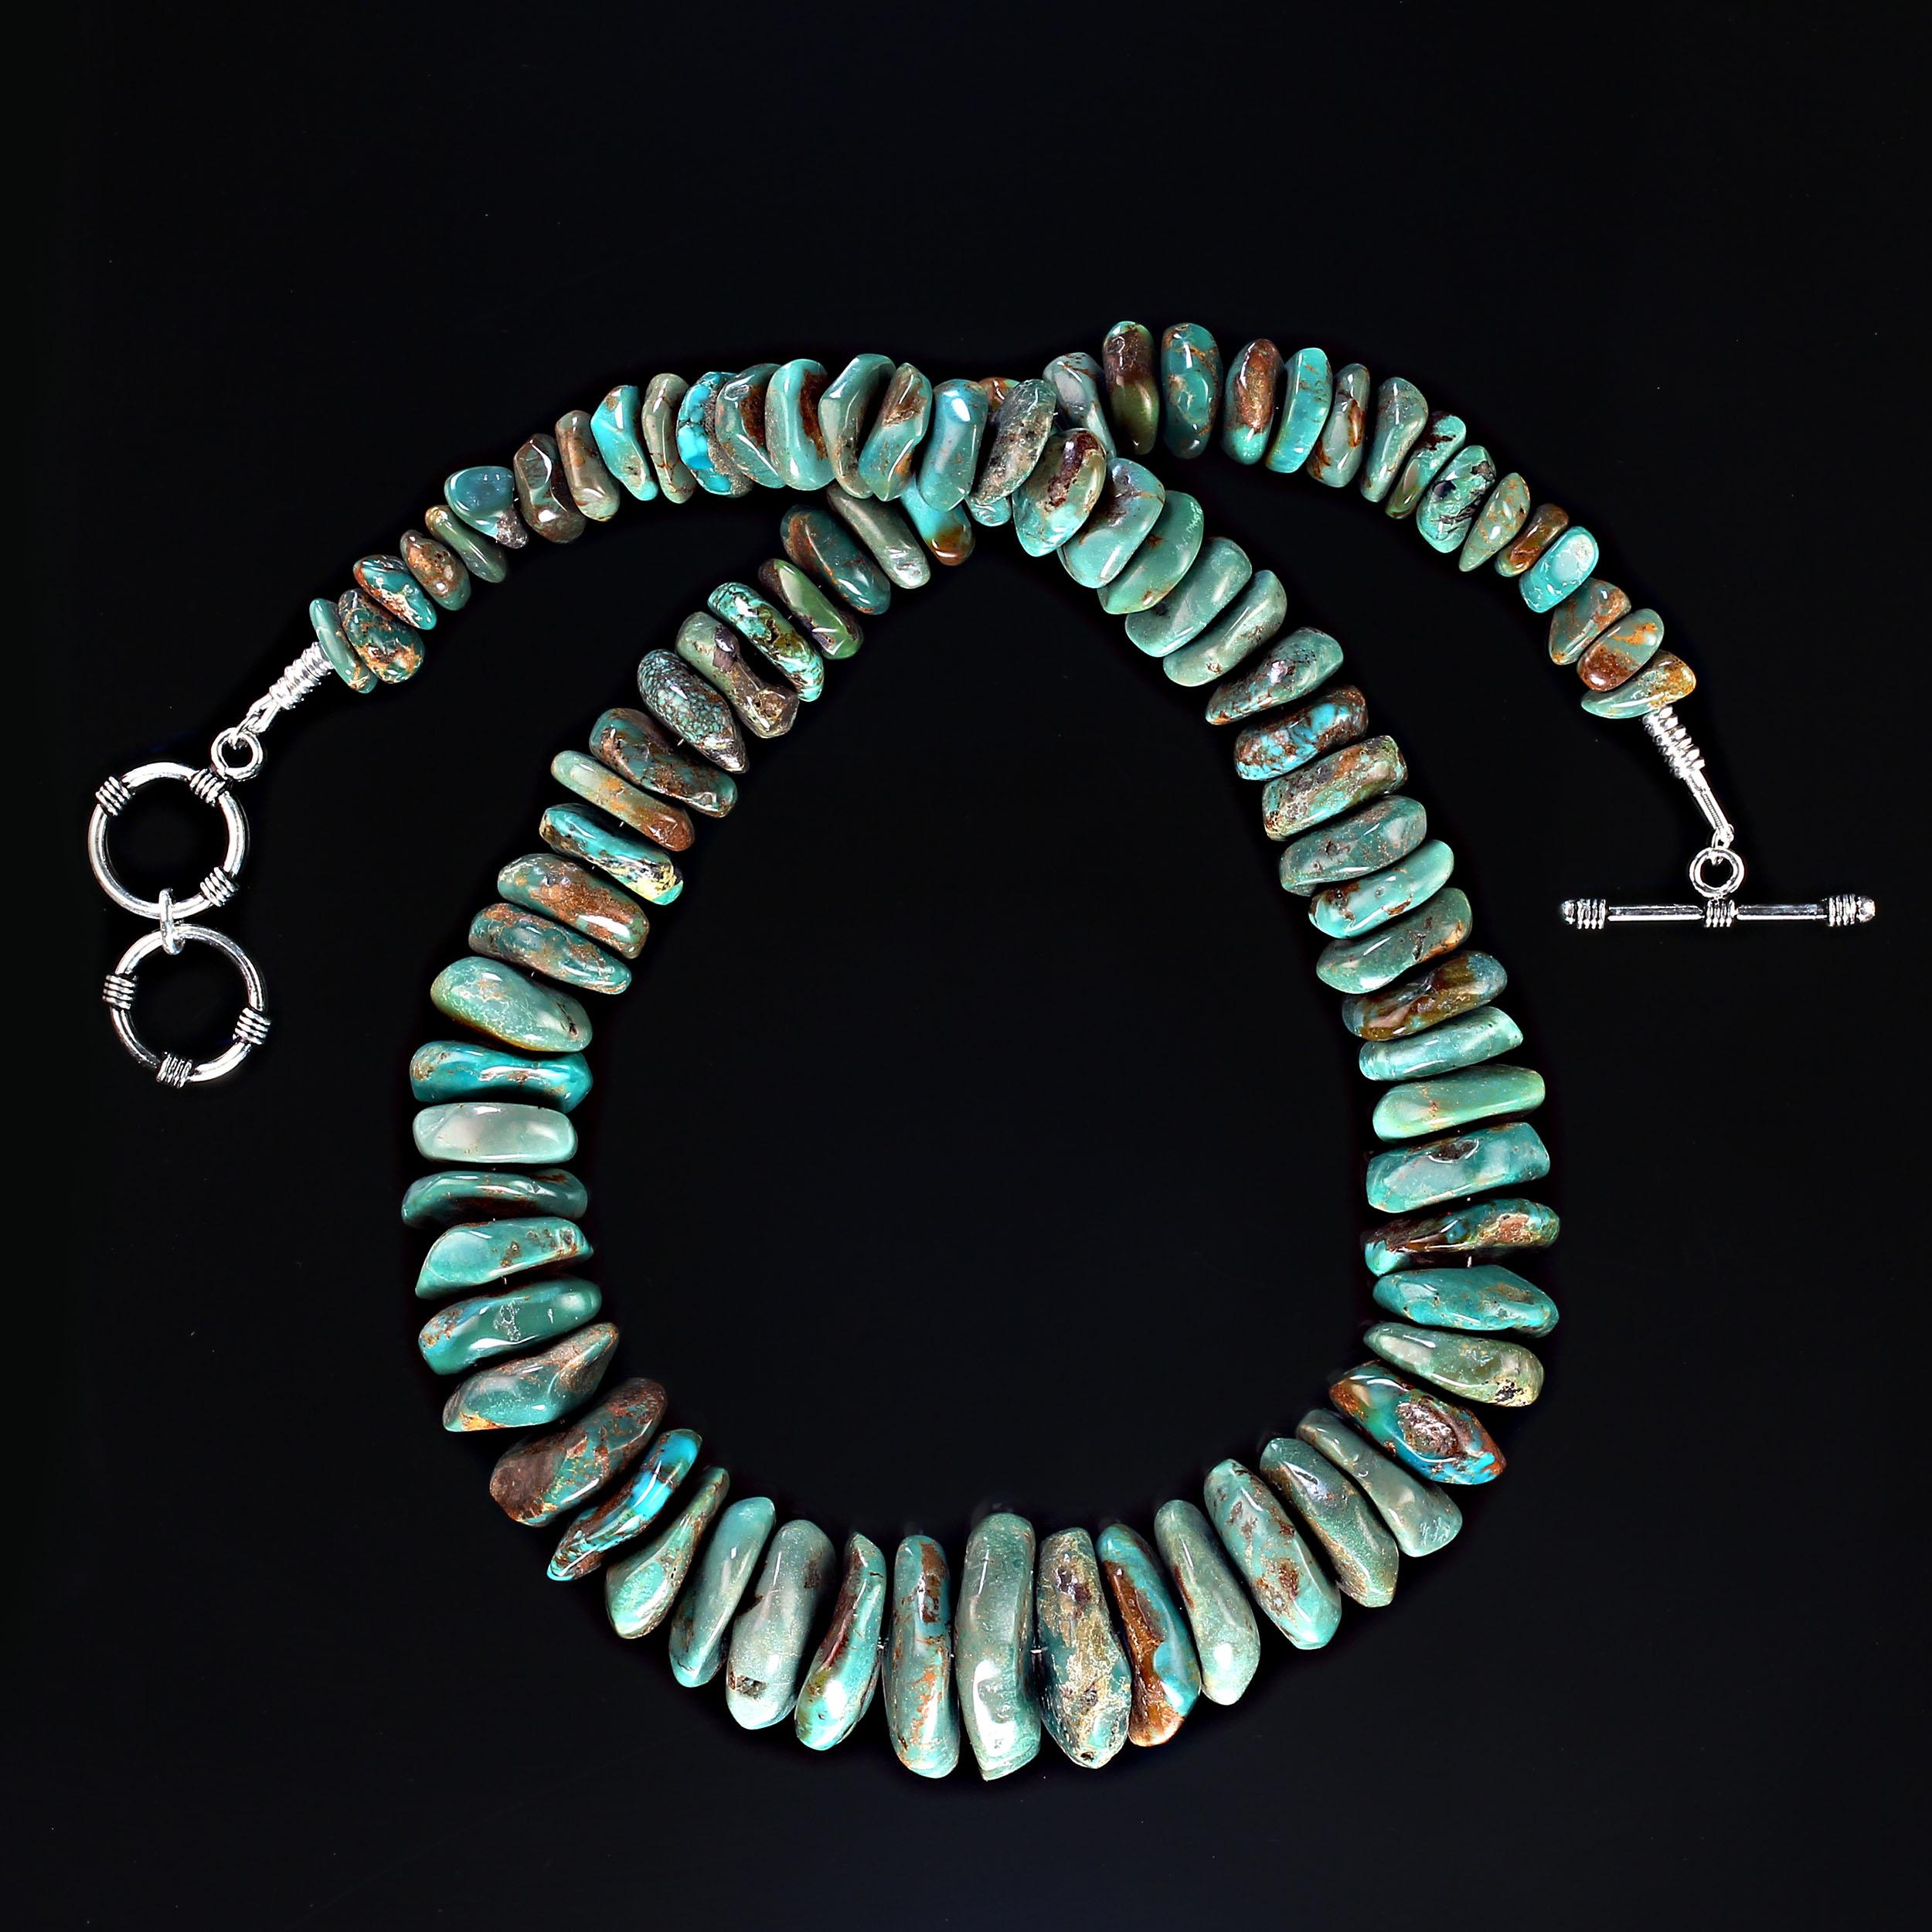 Artisan AJD 20 Inch Graduated Green Turquoise matrix necklace      Perfect Gift! For Sale